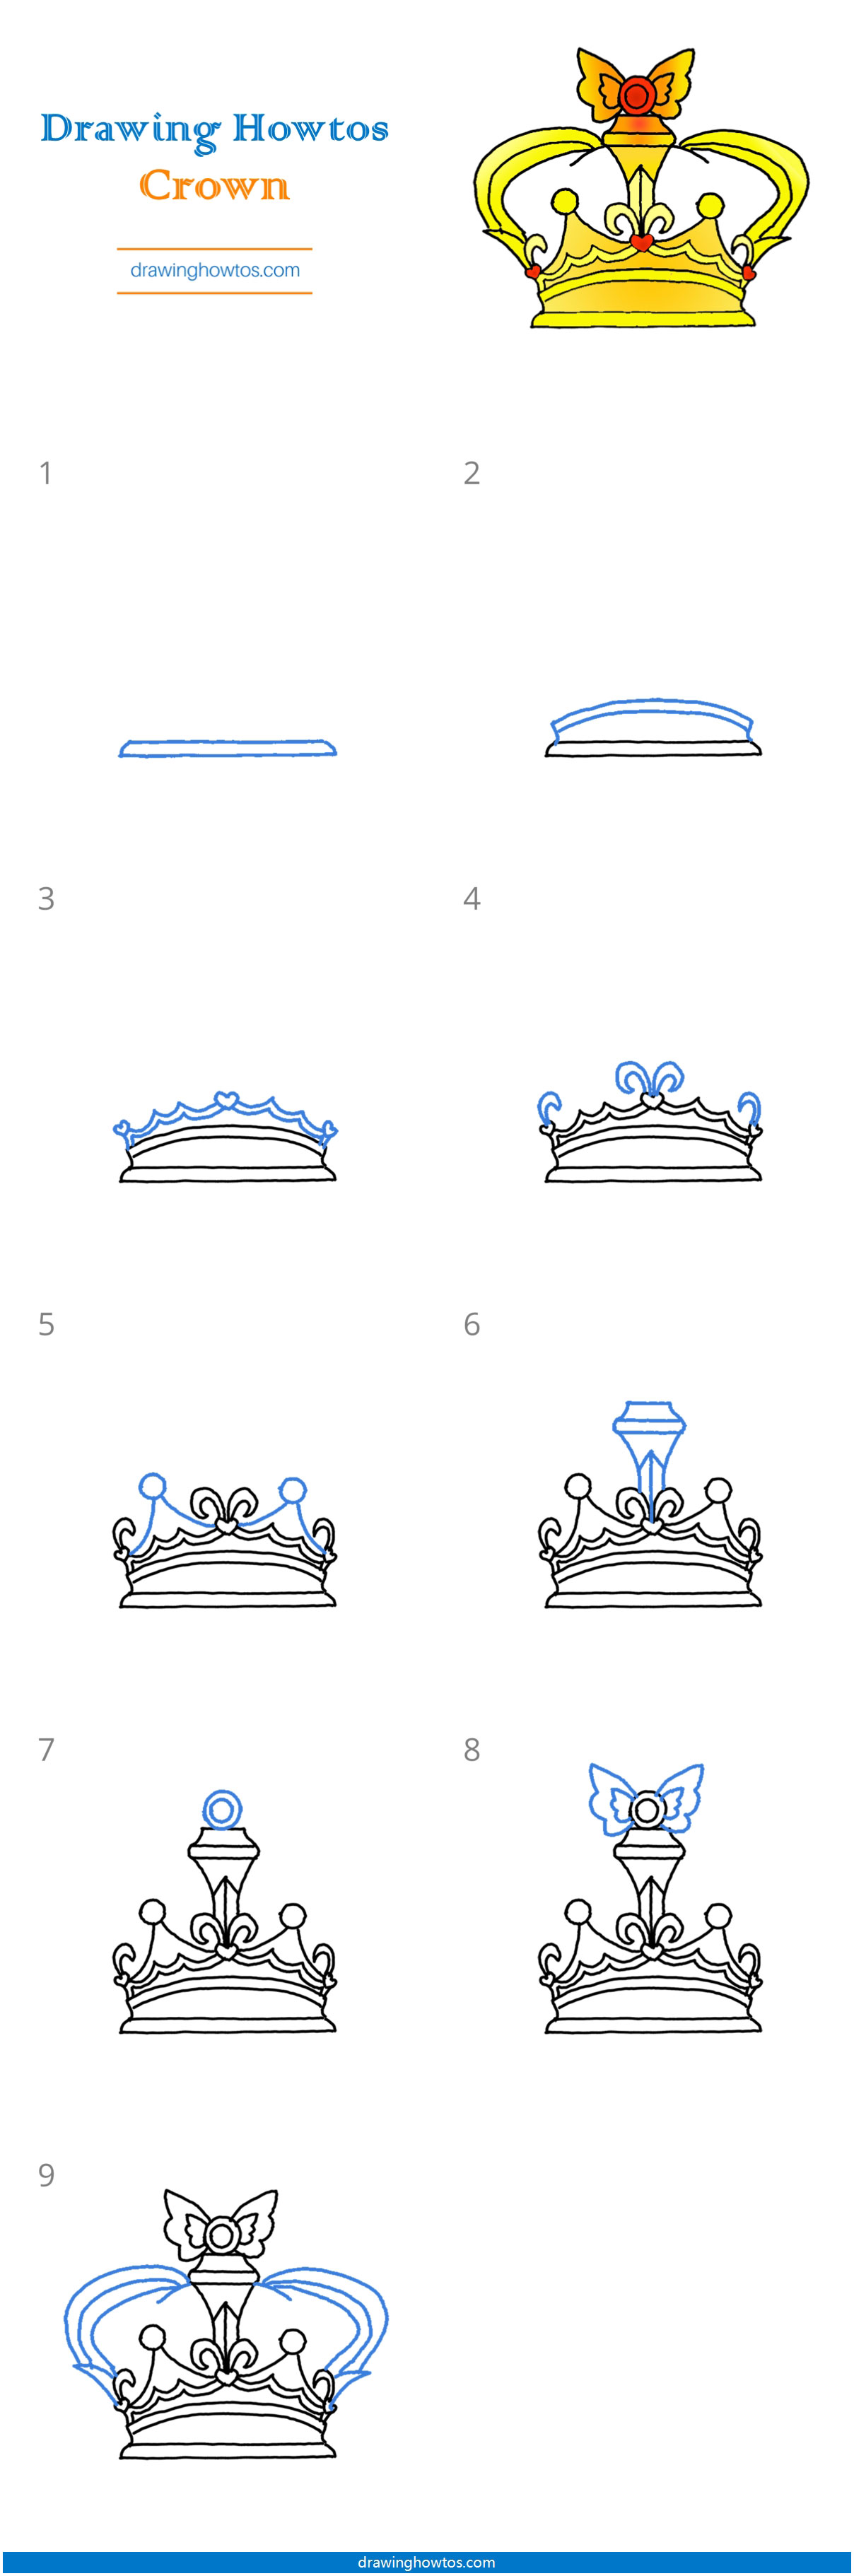 How to Draw a Crown Step by Step